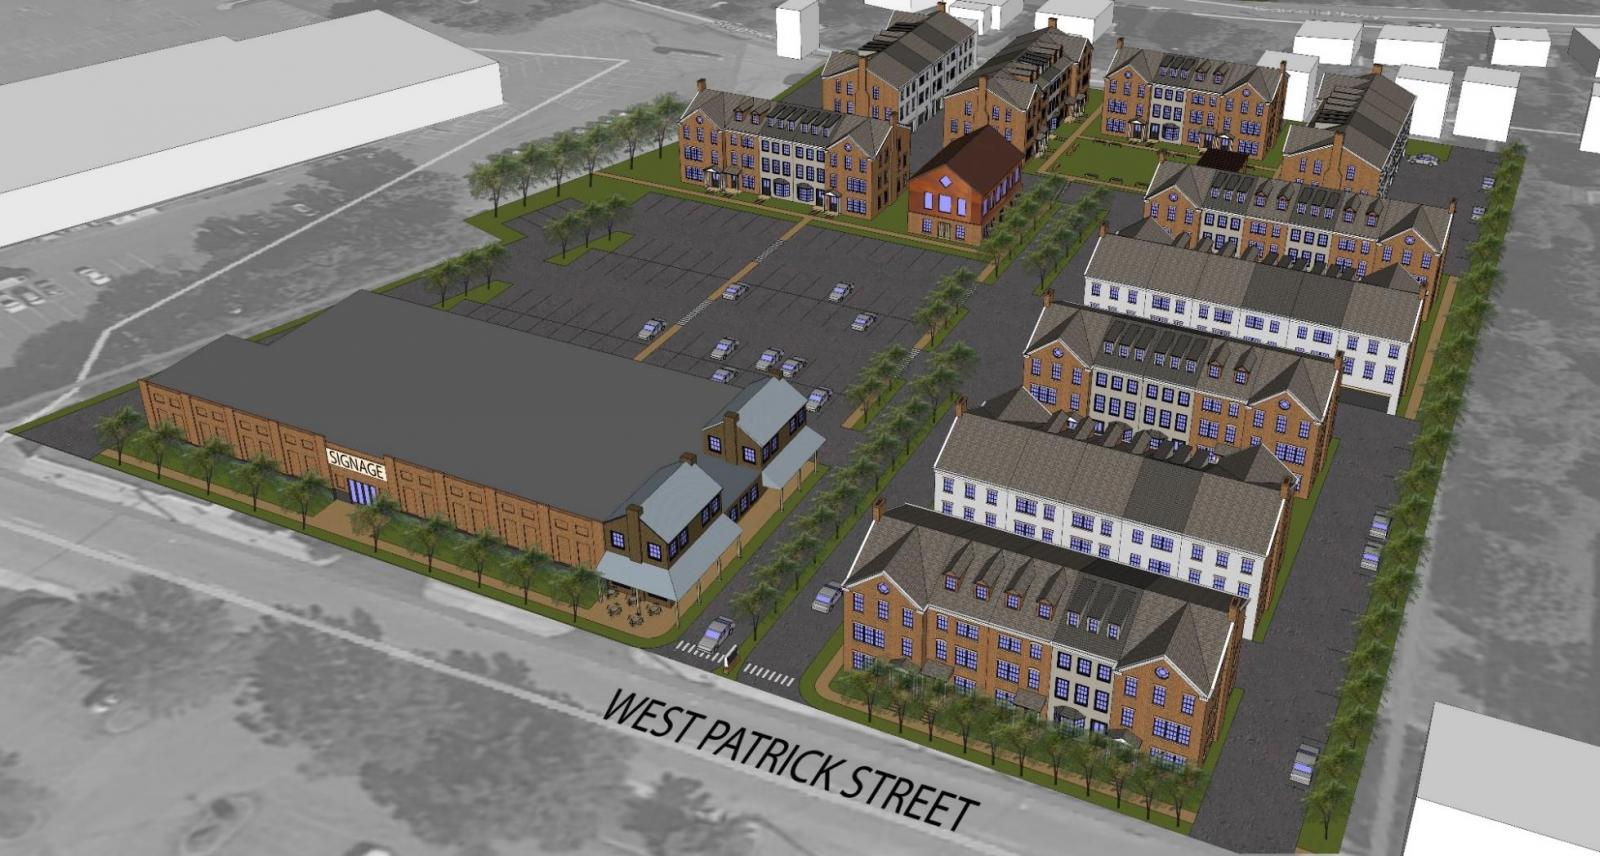 Click for more information about West Park Village: Transformative Development in Frederick, MD